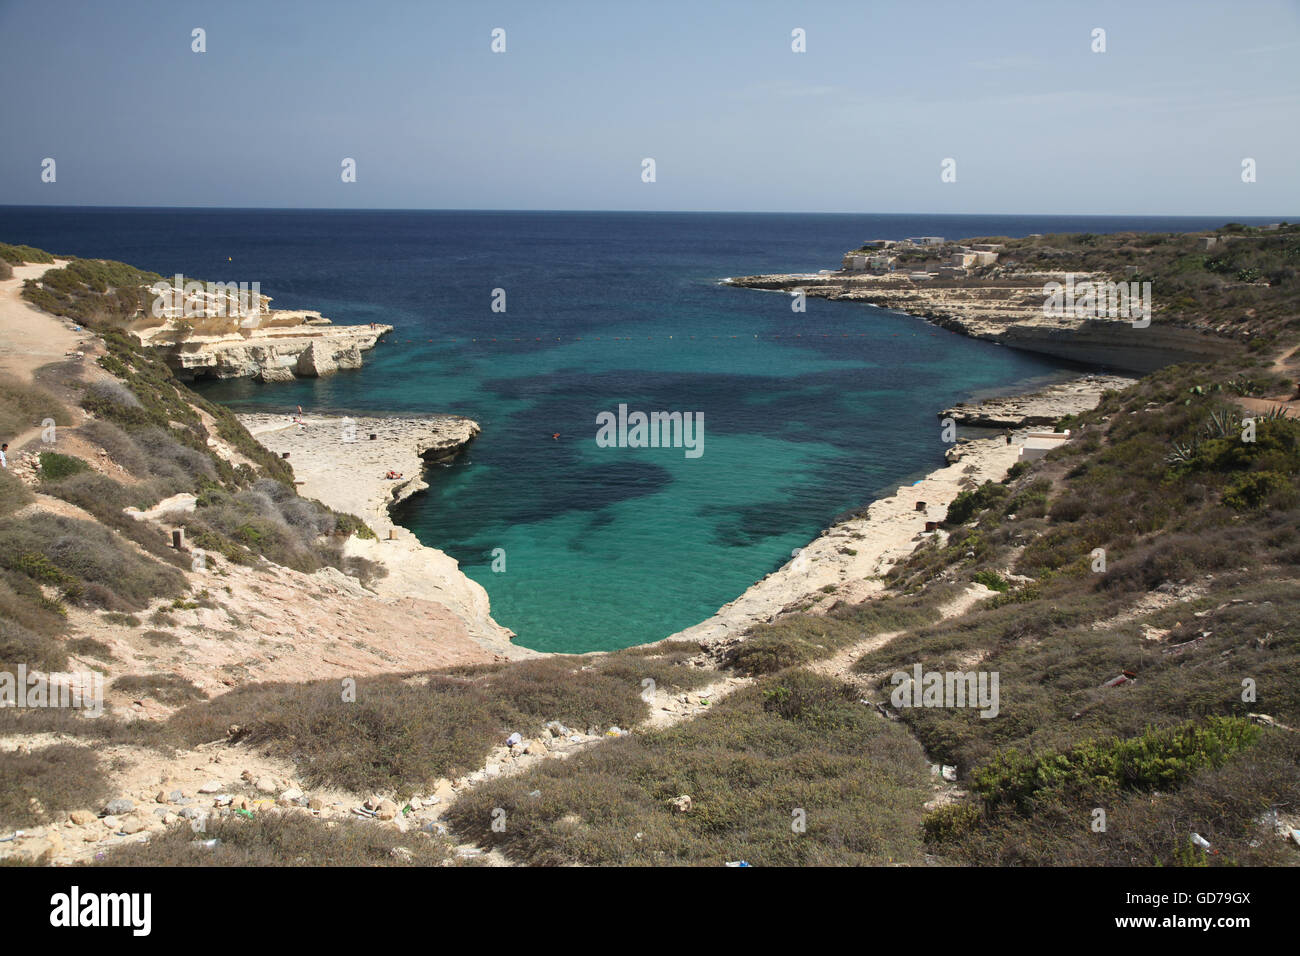 View down onto the small and secluded Delimara pool in the south of Malta, showing the rocky surrounding coast and ocean. Stock Photo